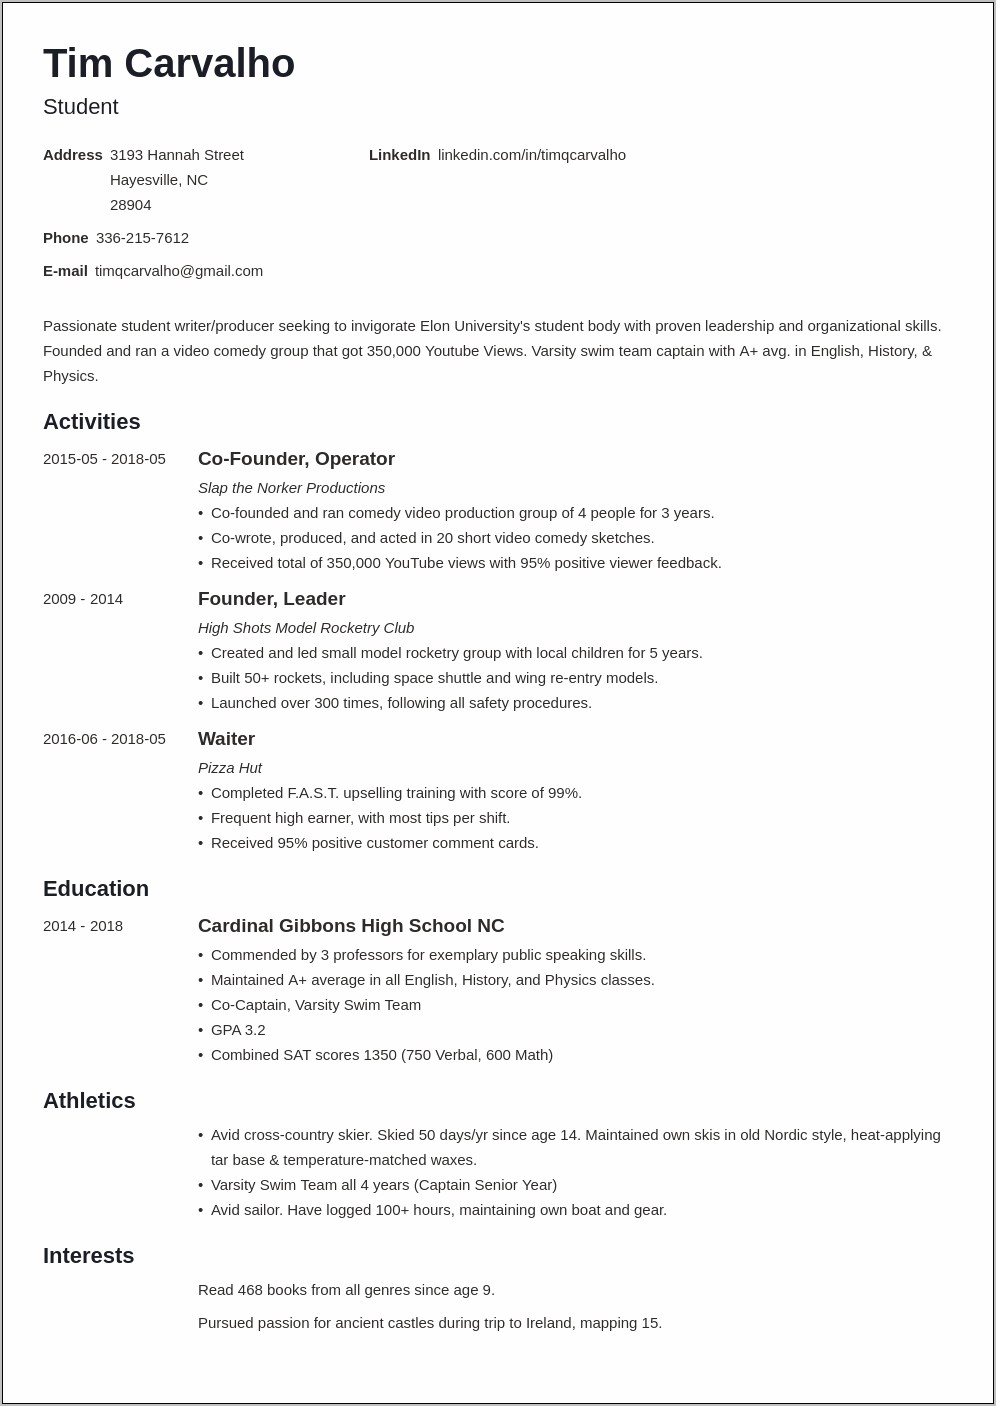 Academic Resume High School For College